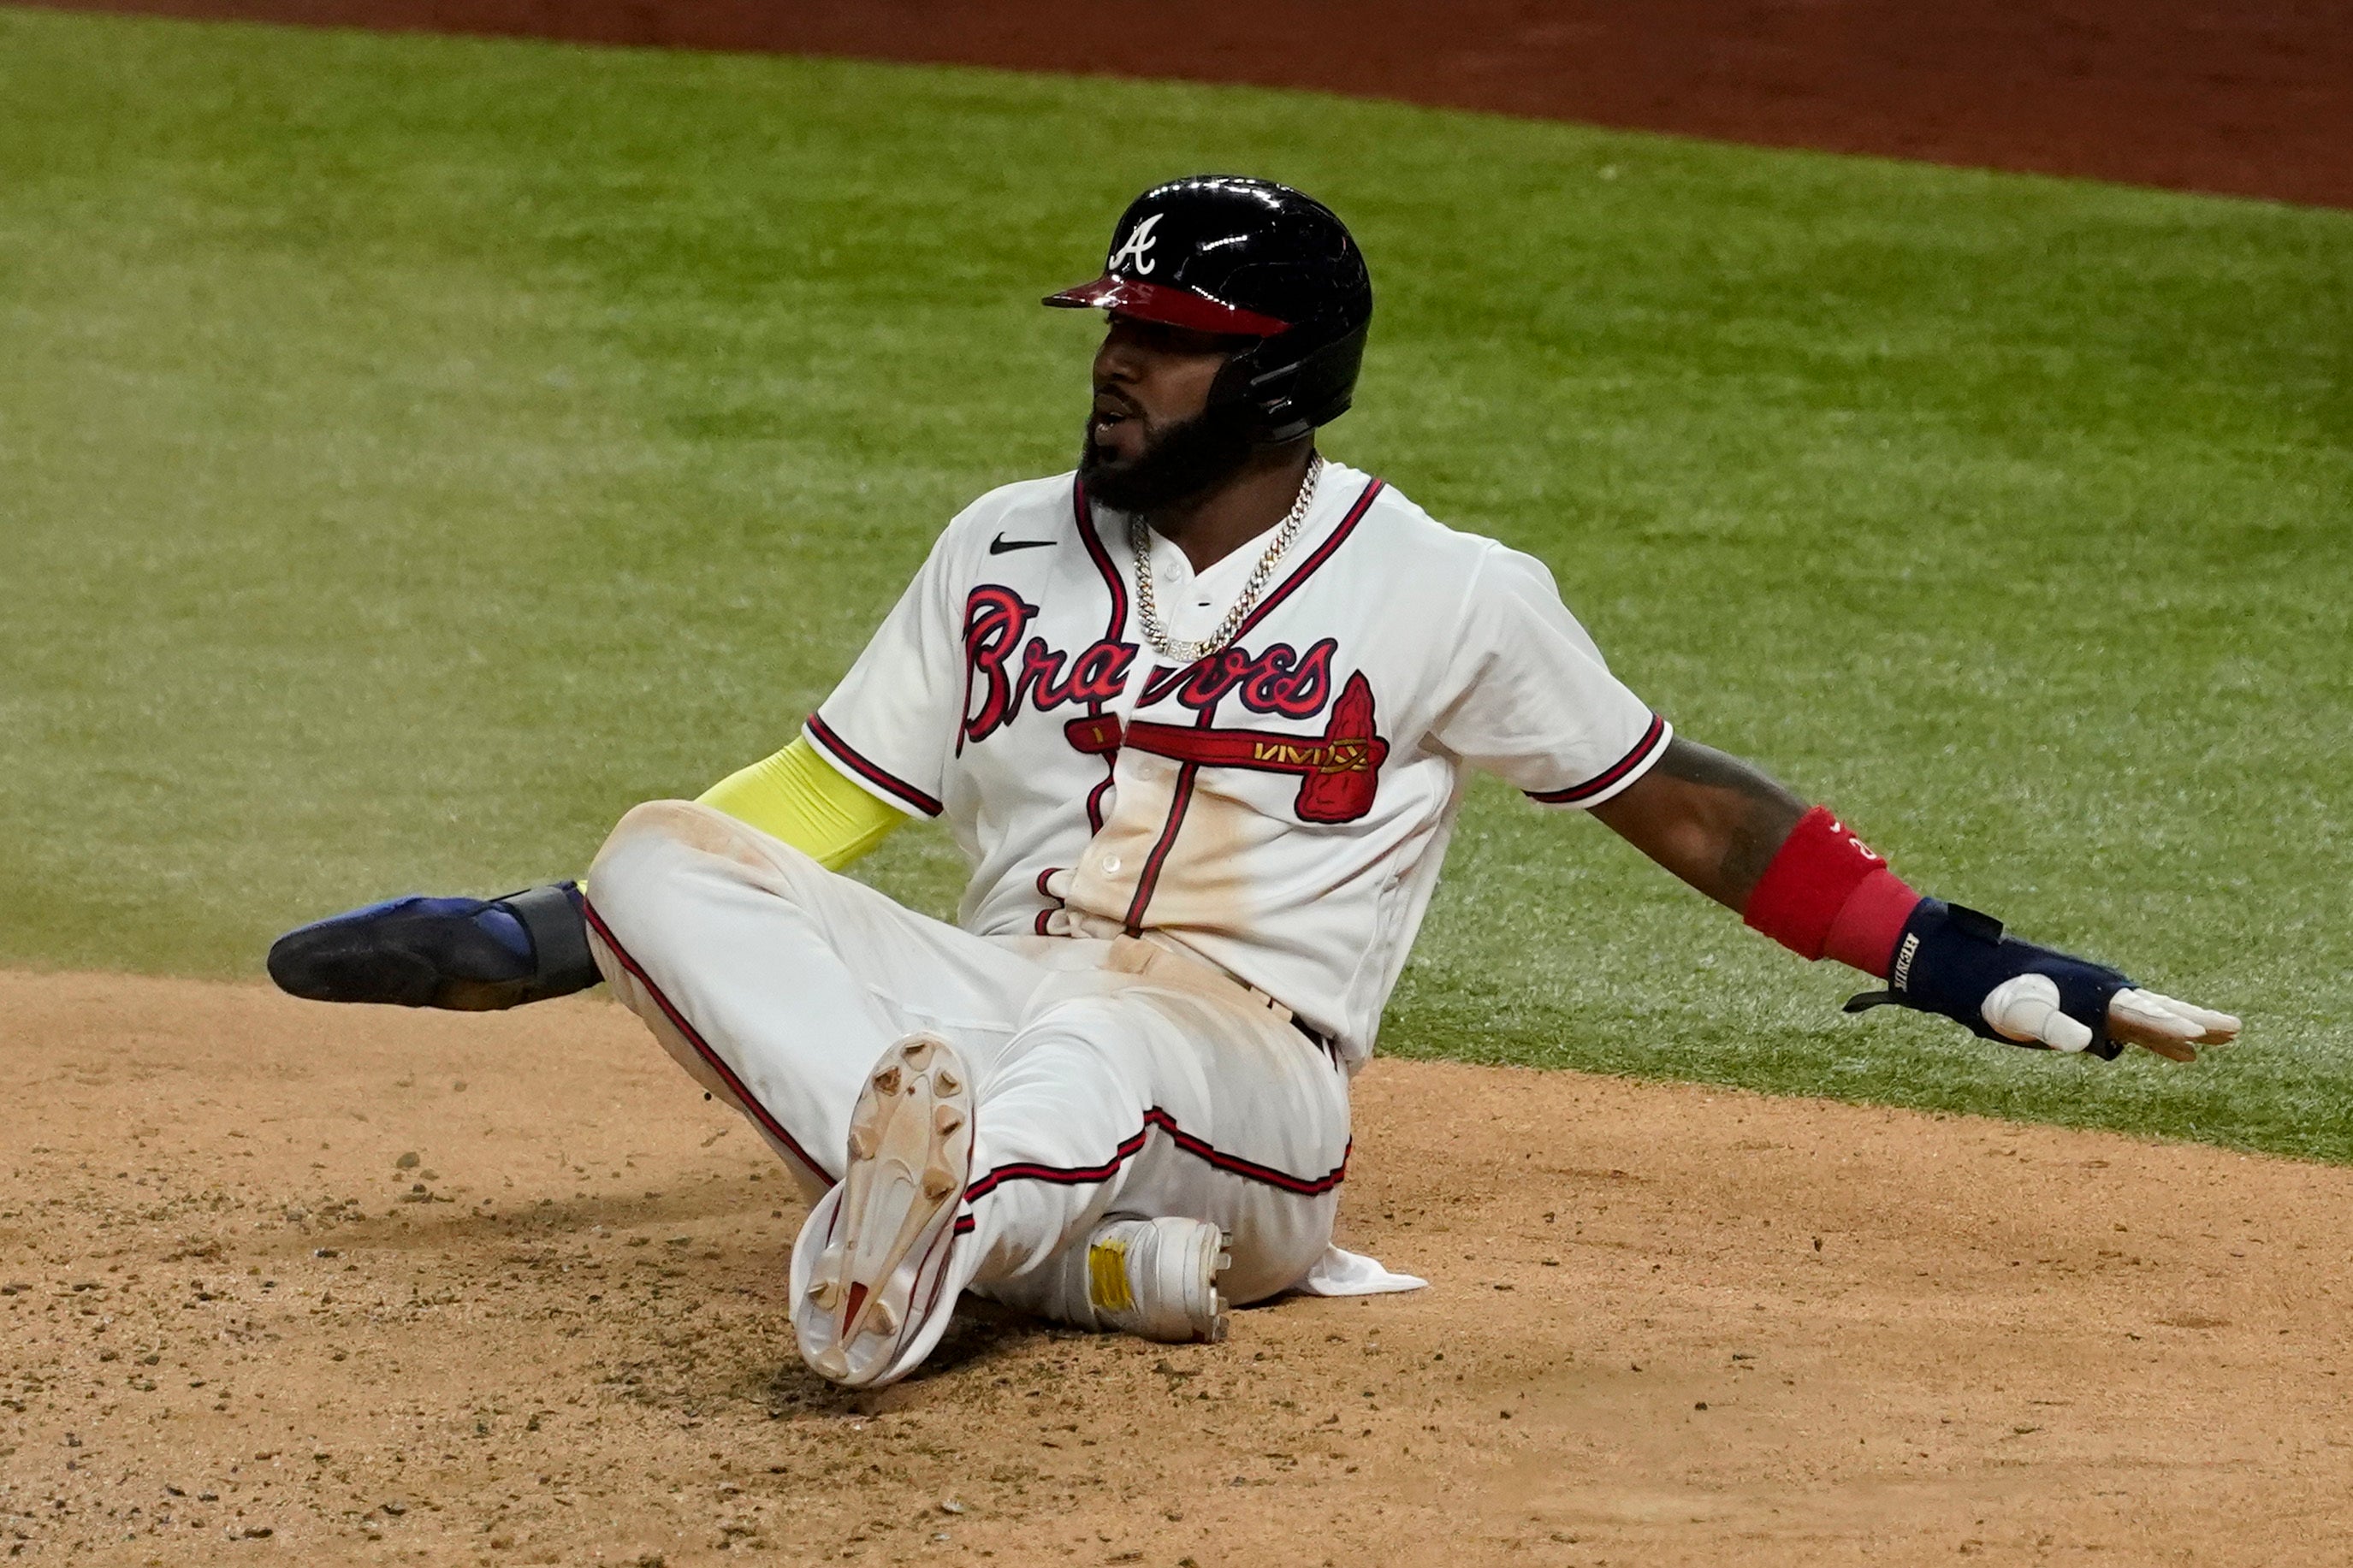 Ozuna mishap costs Braves as World Series wait continues Los